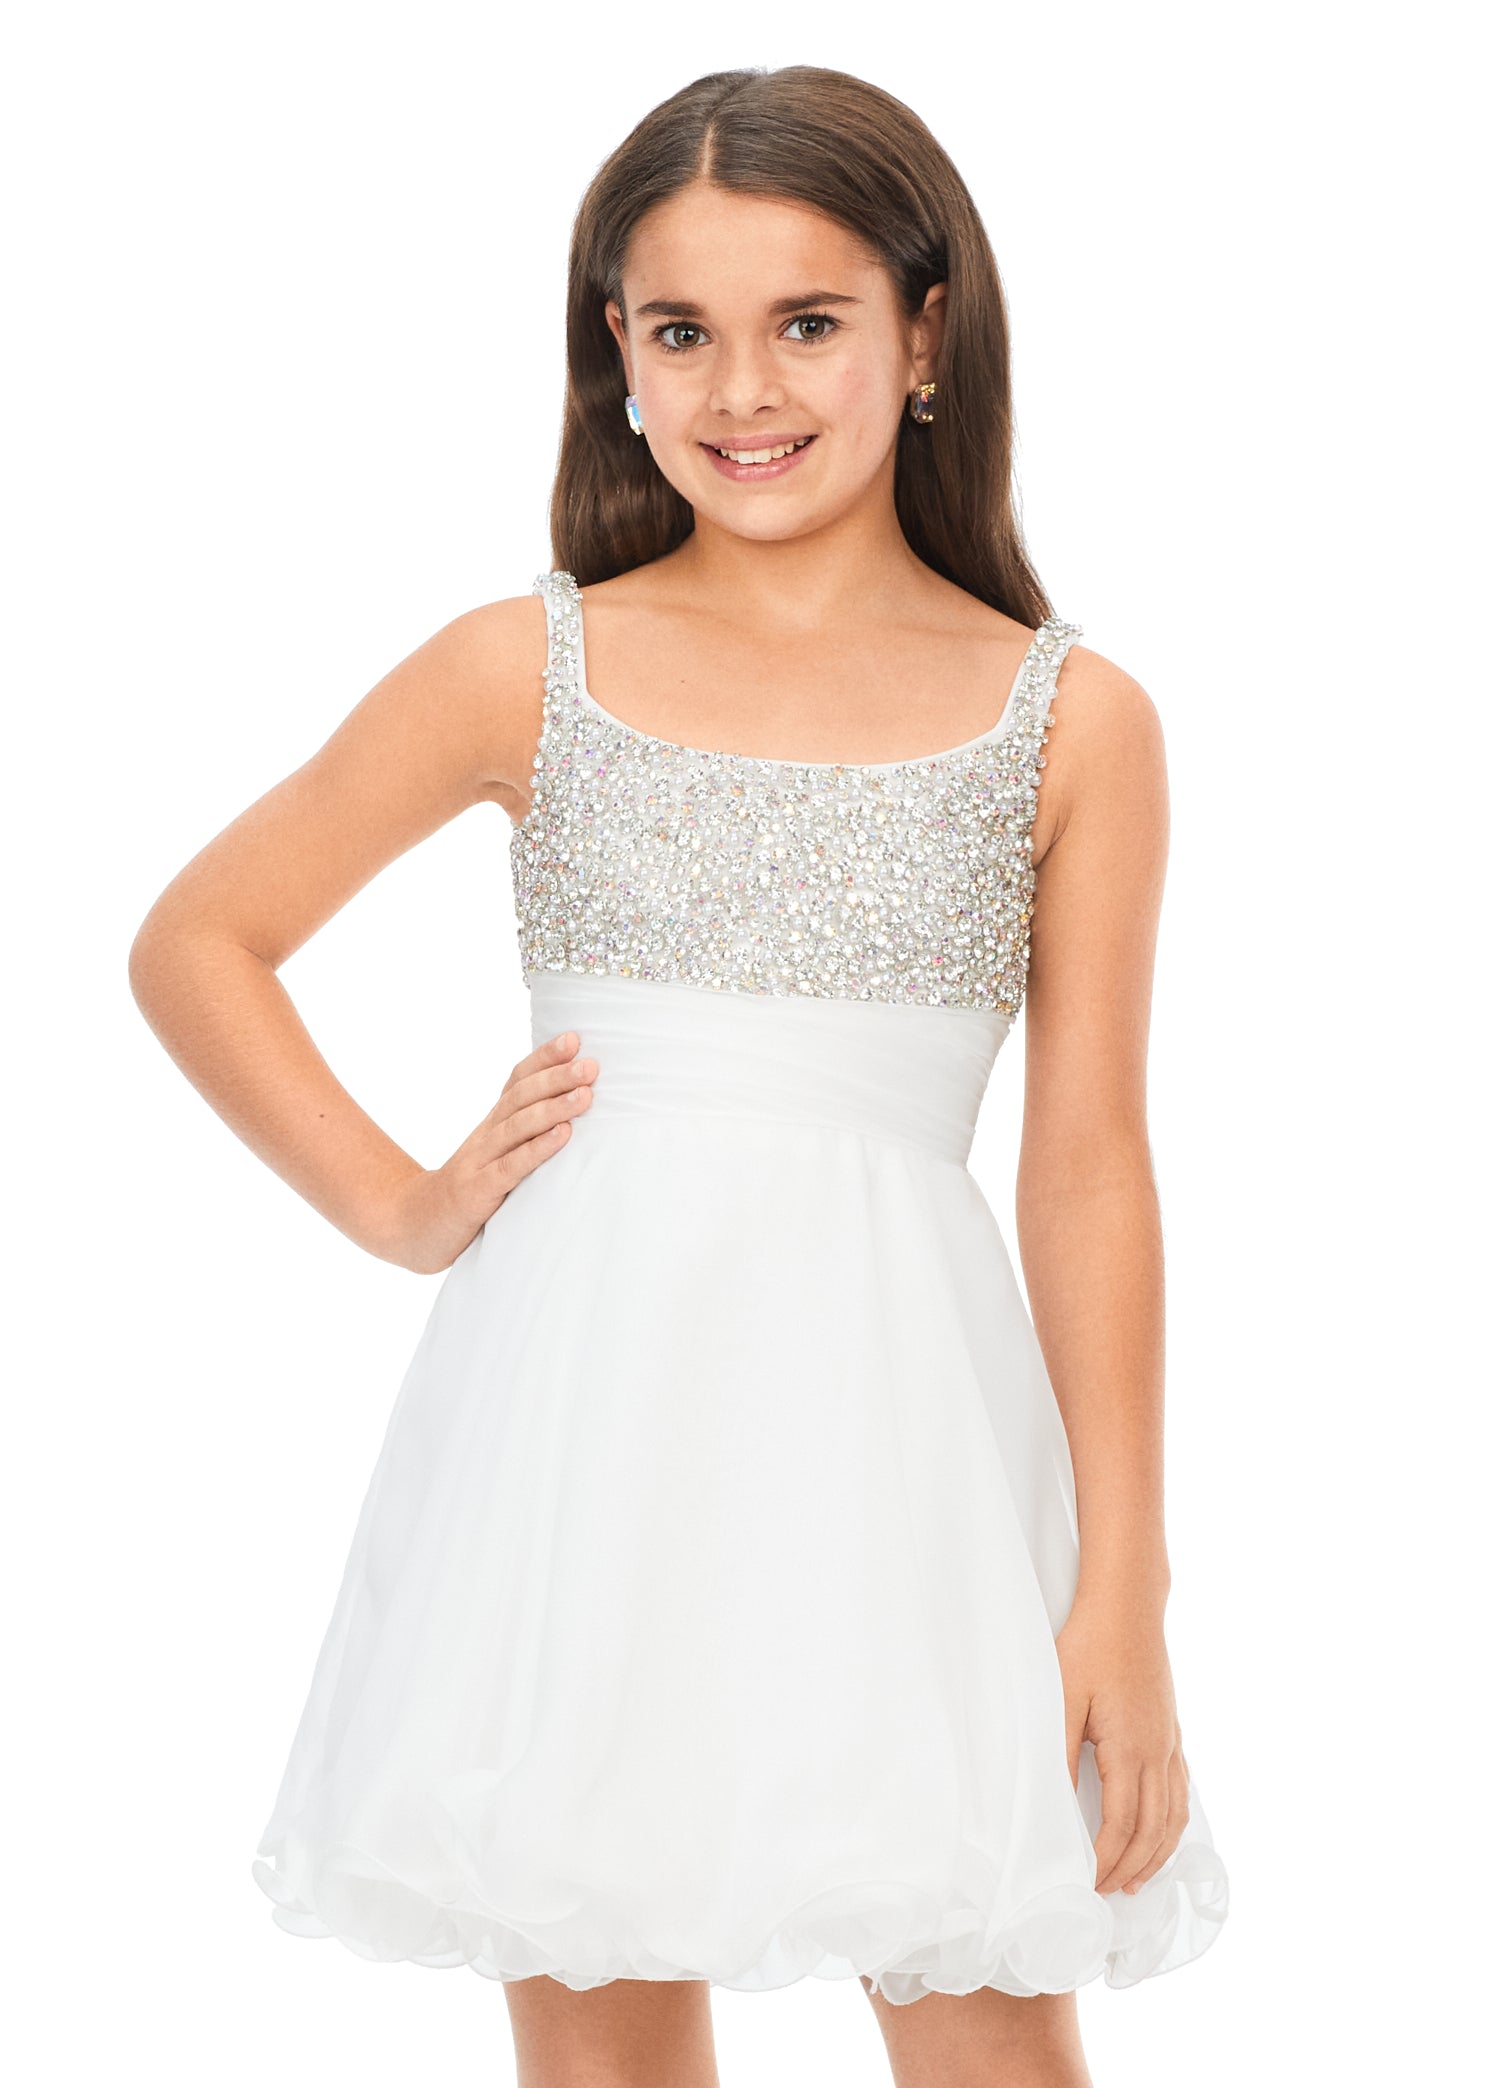 Ashley Lauren Kids 8160 Girls A-Line Cocktail Dress with Crystal Beaded Bustier  This a-line chiffon cocktail gown features a beaded bustier top and ruched waist detail for the perfect, fun look!  Scoop Neckline Beaded Bustier A-Line Skirt Chiffon COLORS: Hot Pink, Ivory, Orchid